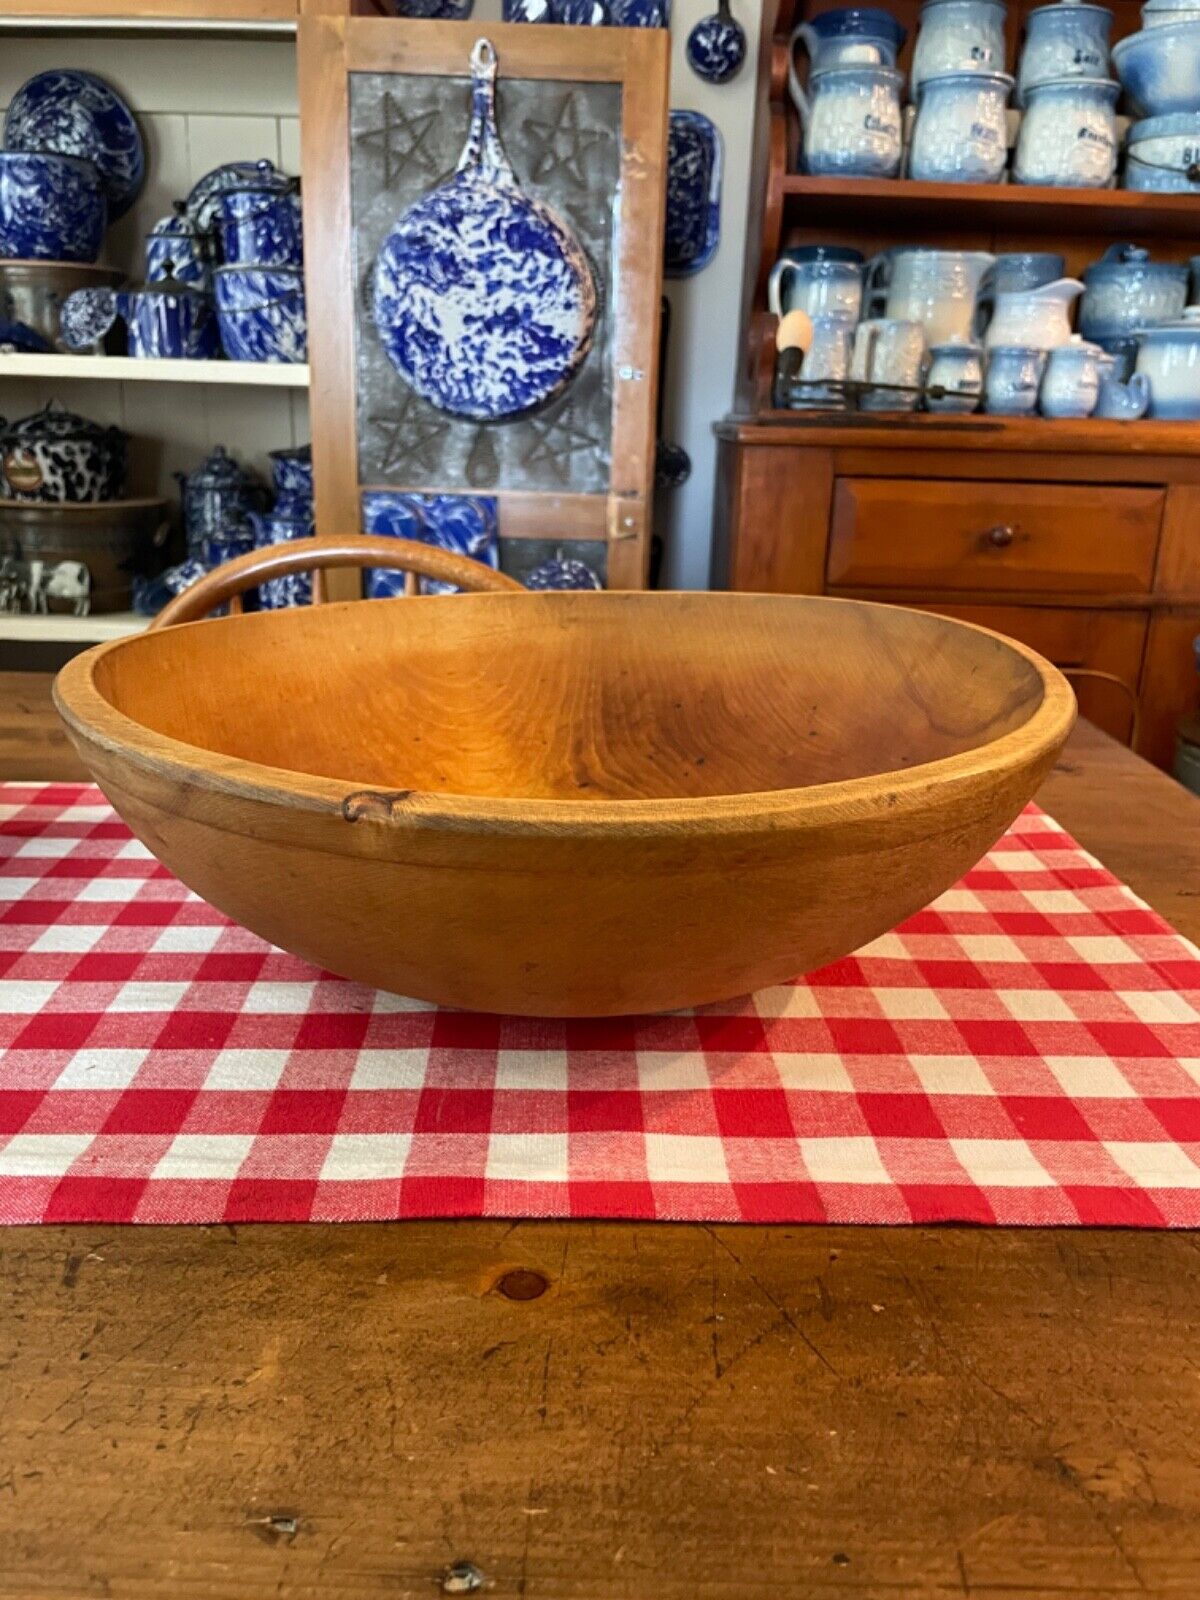 Antiue Large Wood Bowl by Munising (15 inches in diameter)